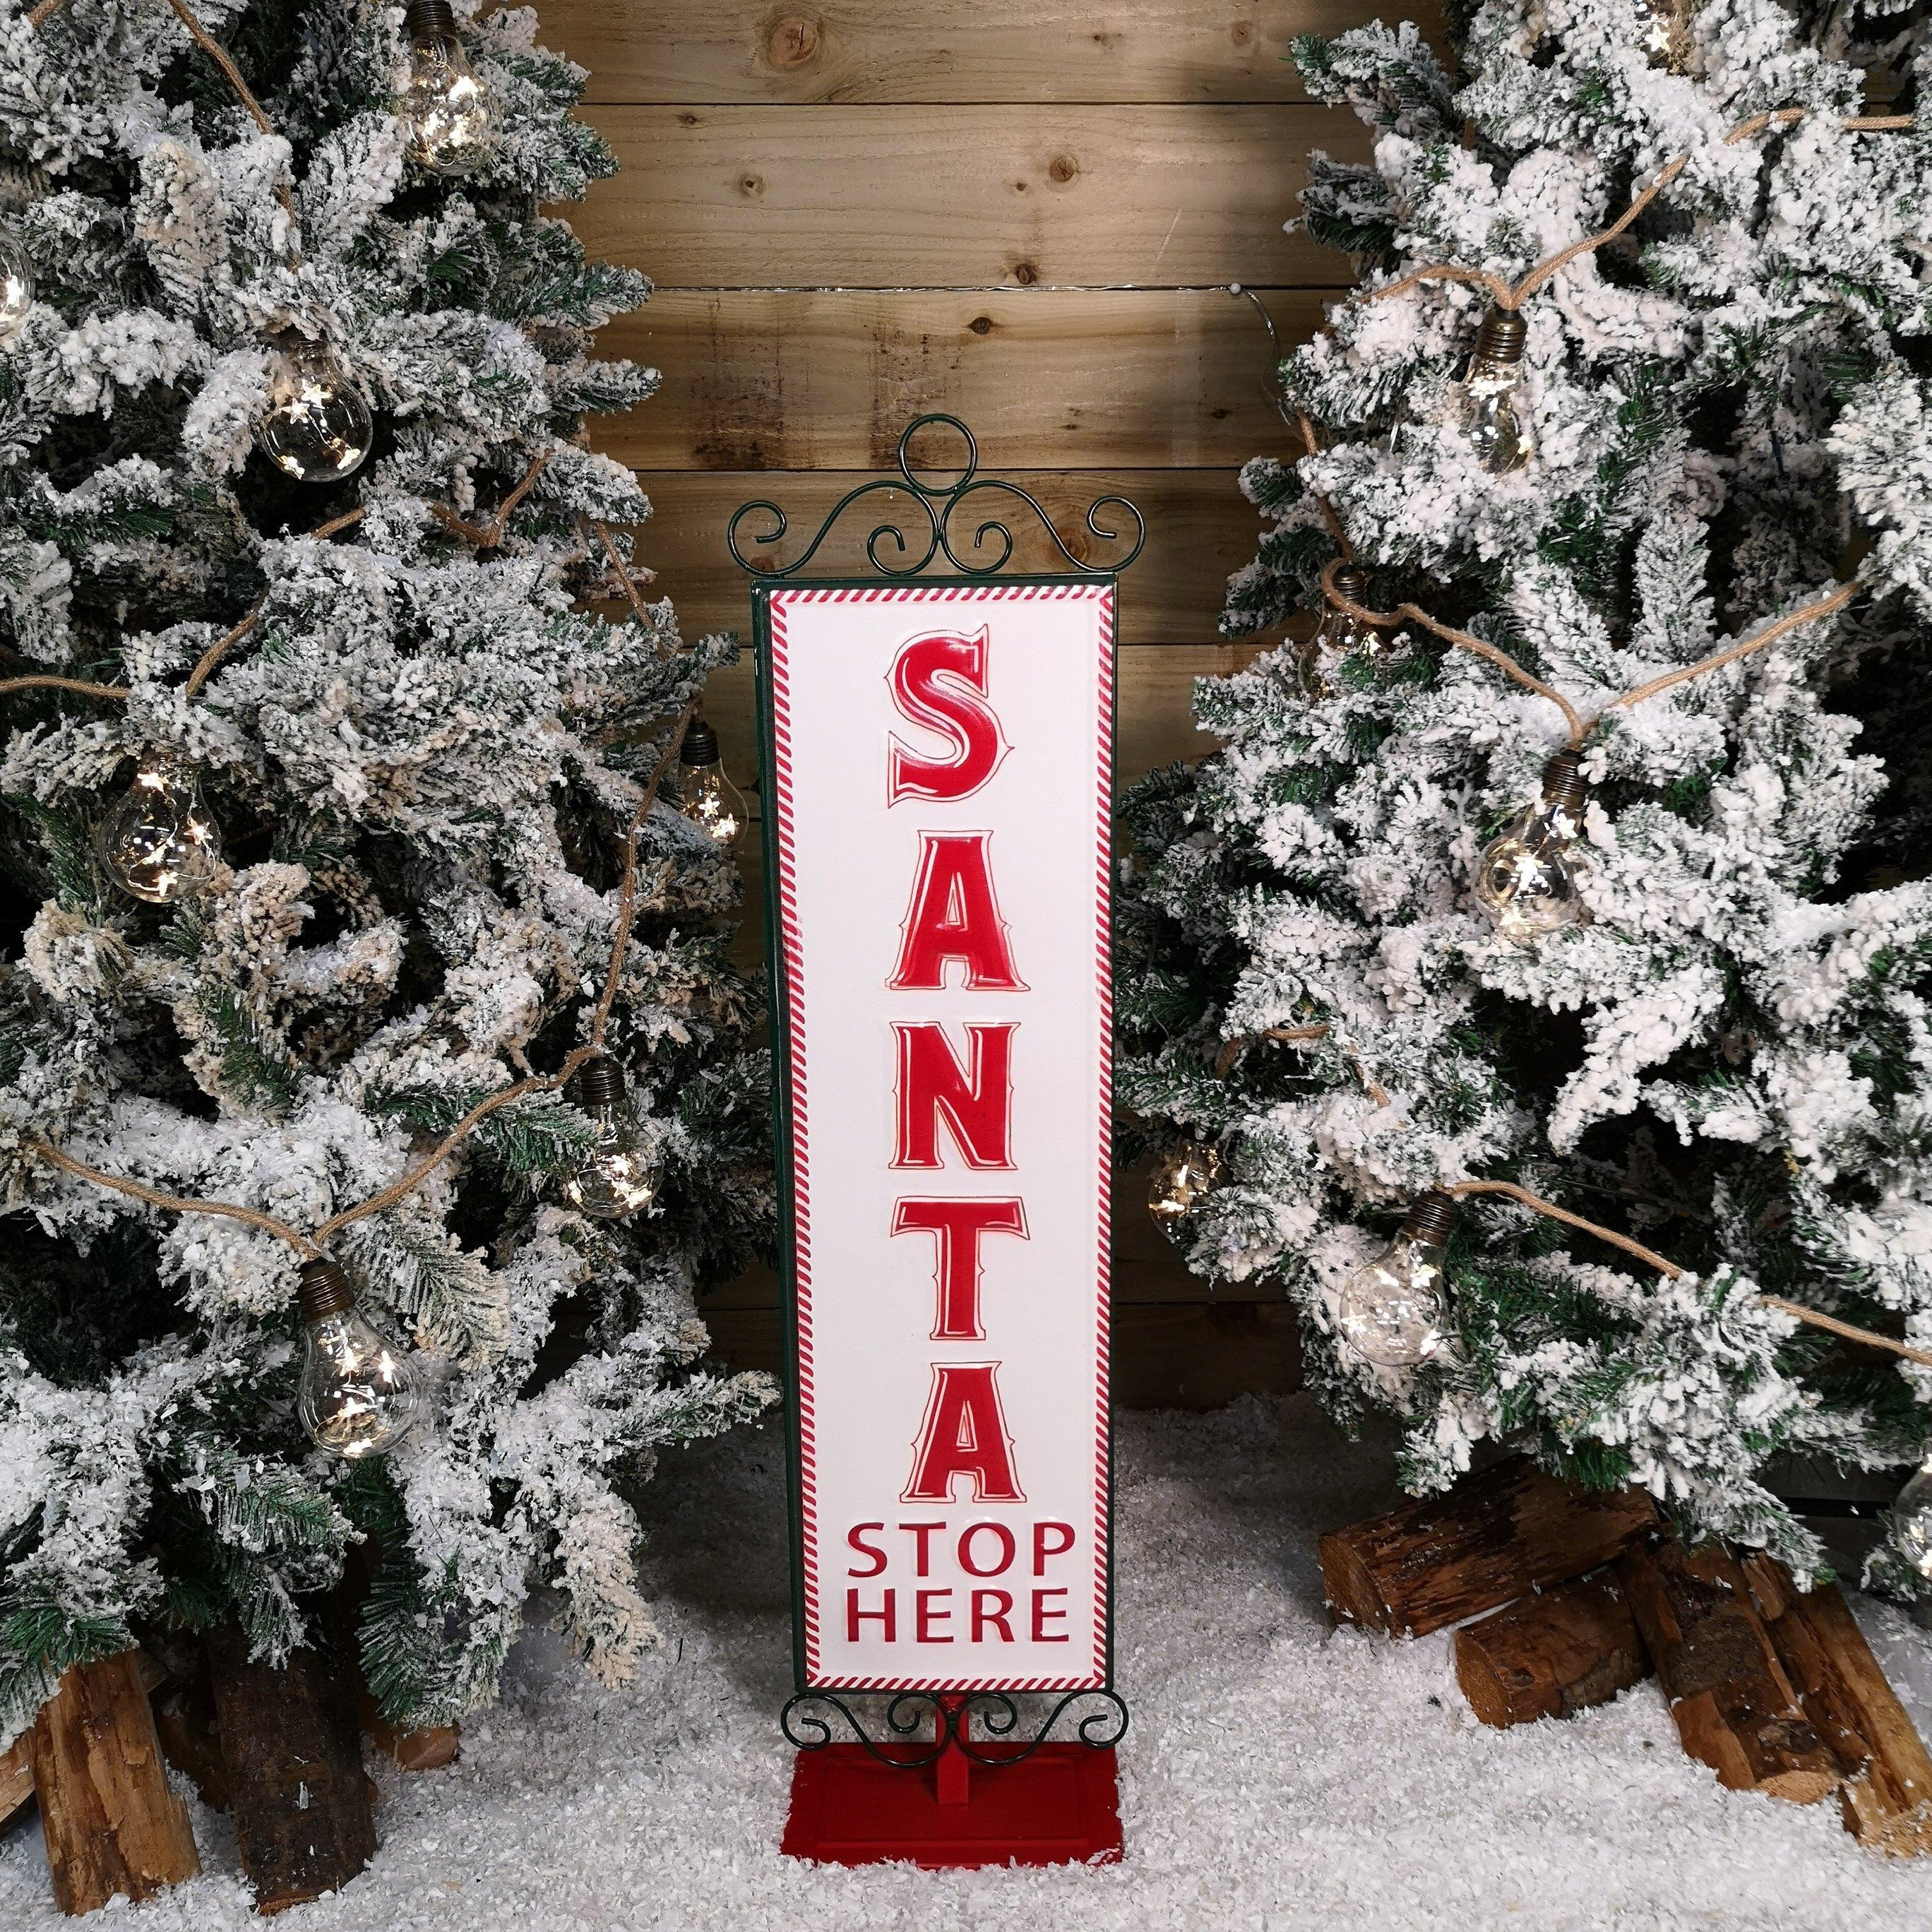 86cm Red and White Santa Stop Here Sign Christmas Decoration - image 1